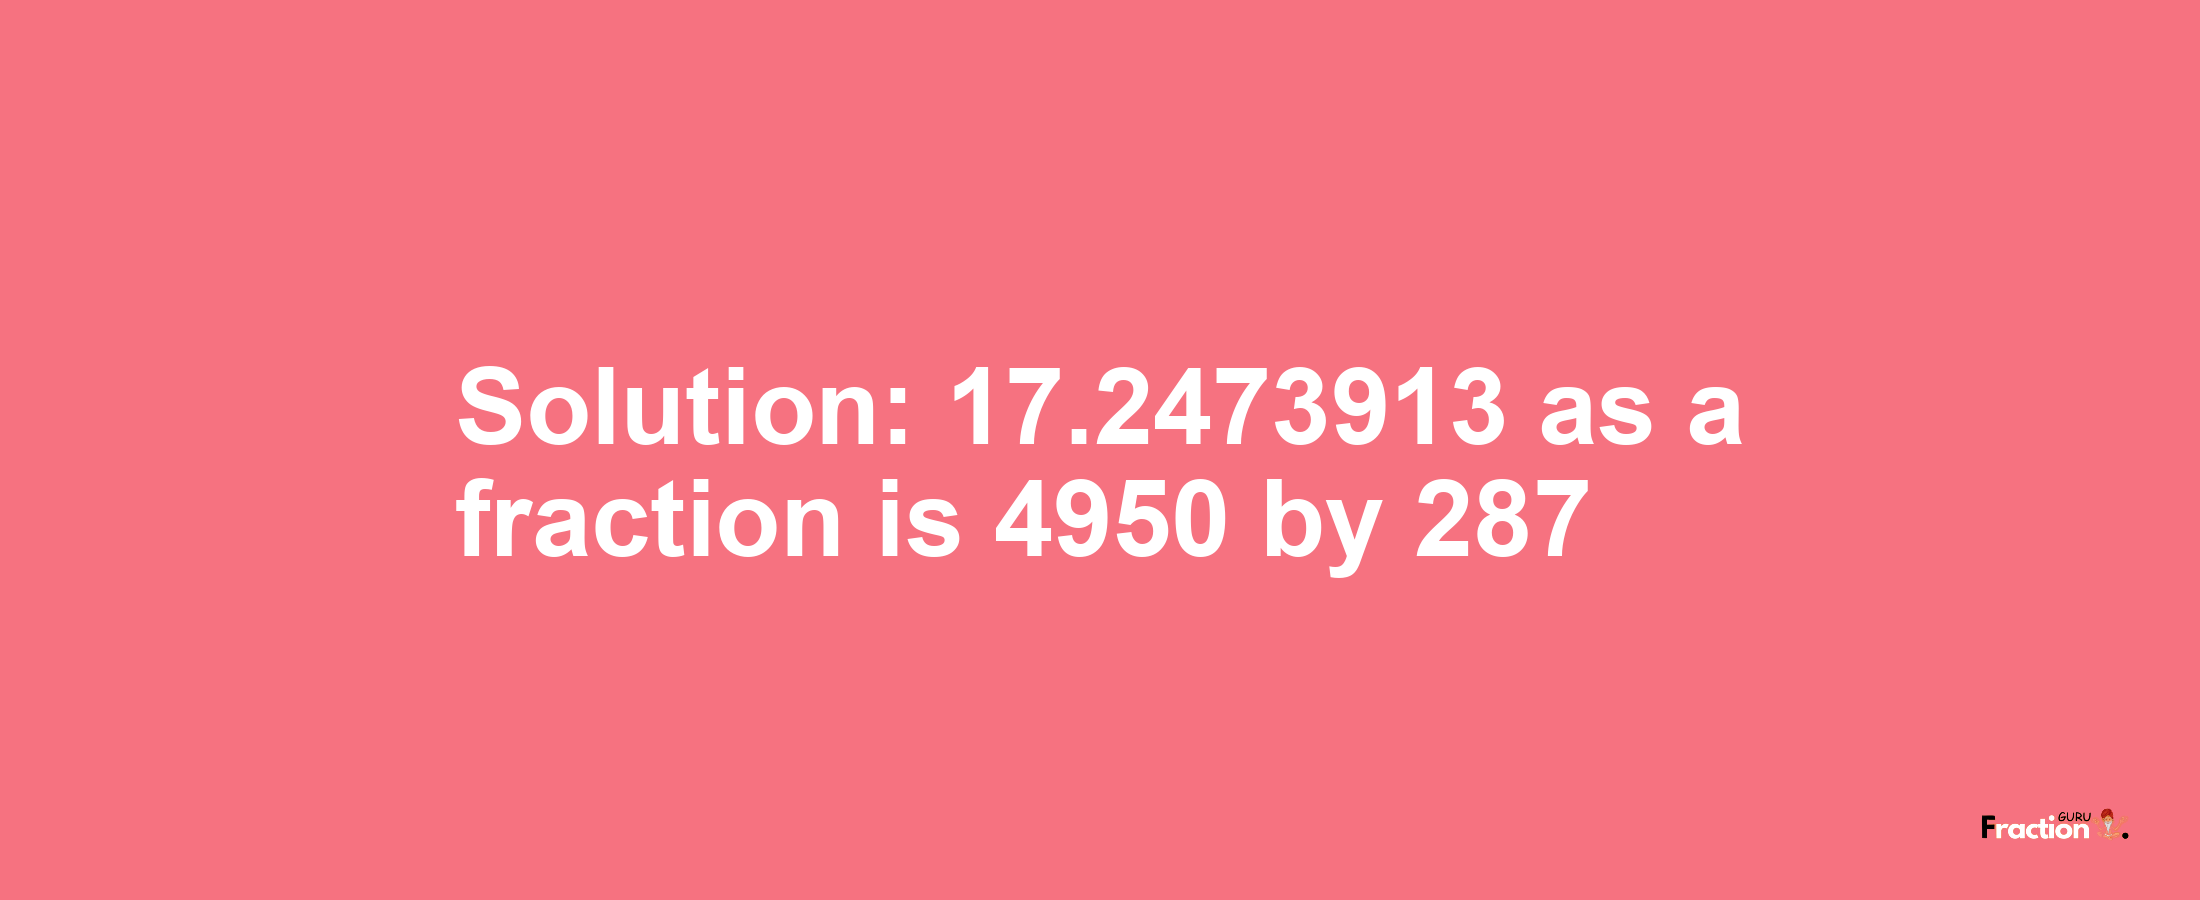 Solution:17.2473913 as a fraction is 4950/287